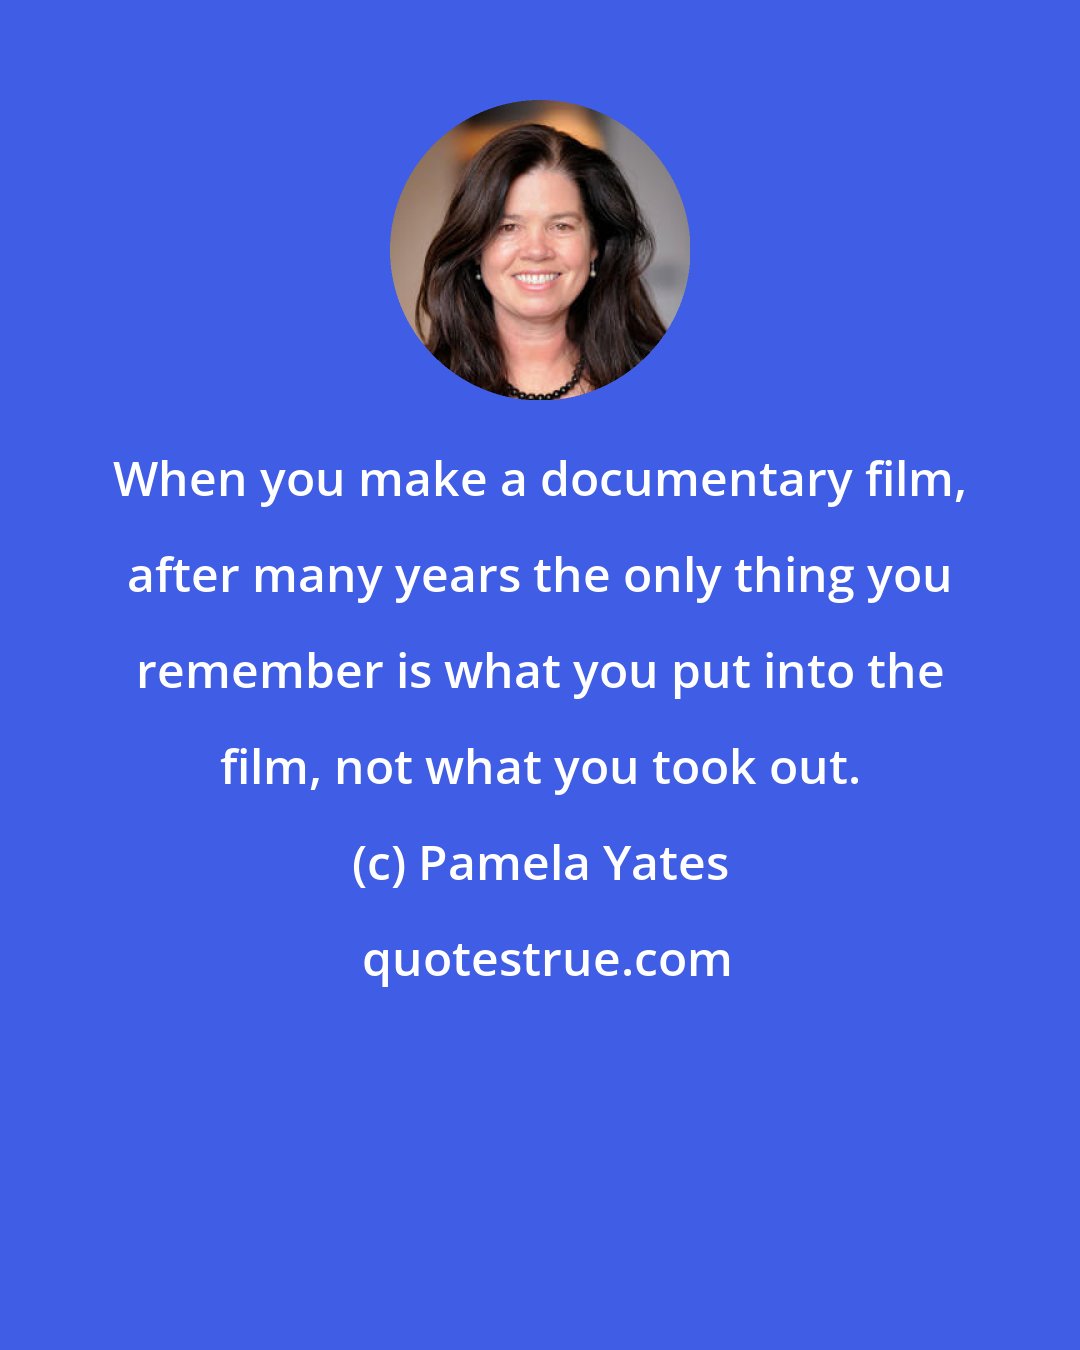 Pamela Yates: When you make a documentary film, after many years the only thing you remember is what you put into the film, not what you took out.